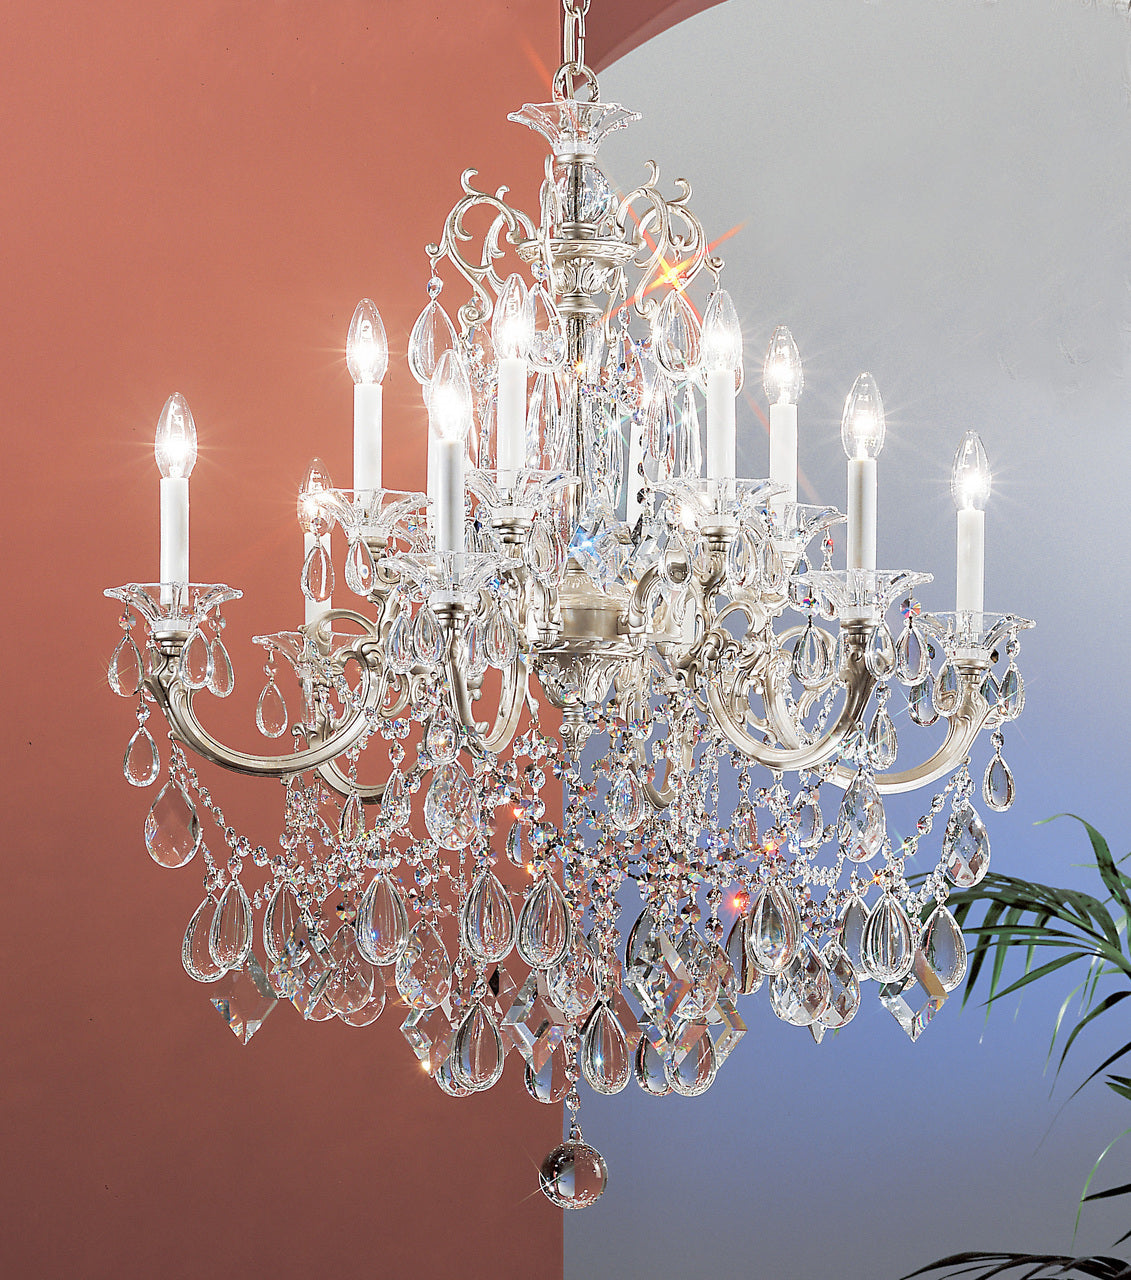 Classic Lighting 57024 CHP C Via Venteo Crystal Chandelier in Champagne Pearl (Imported from Spain)